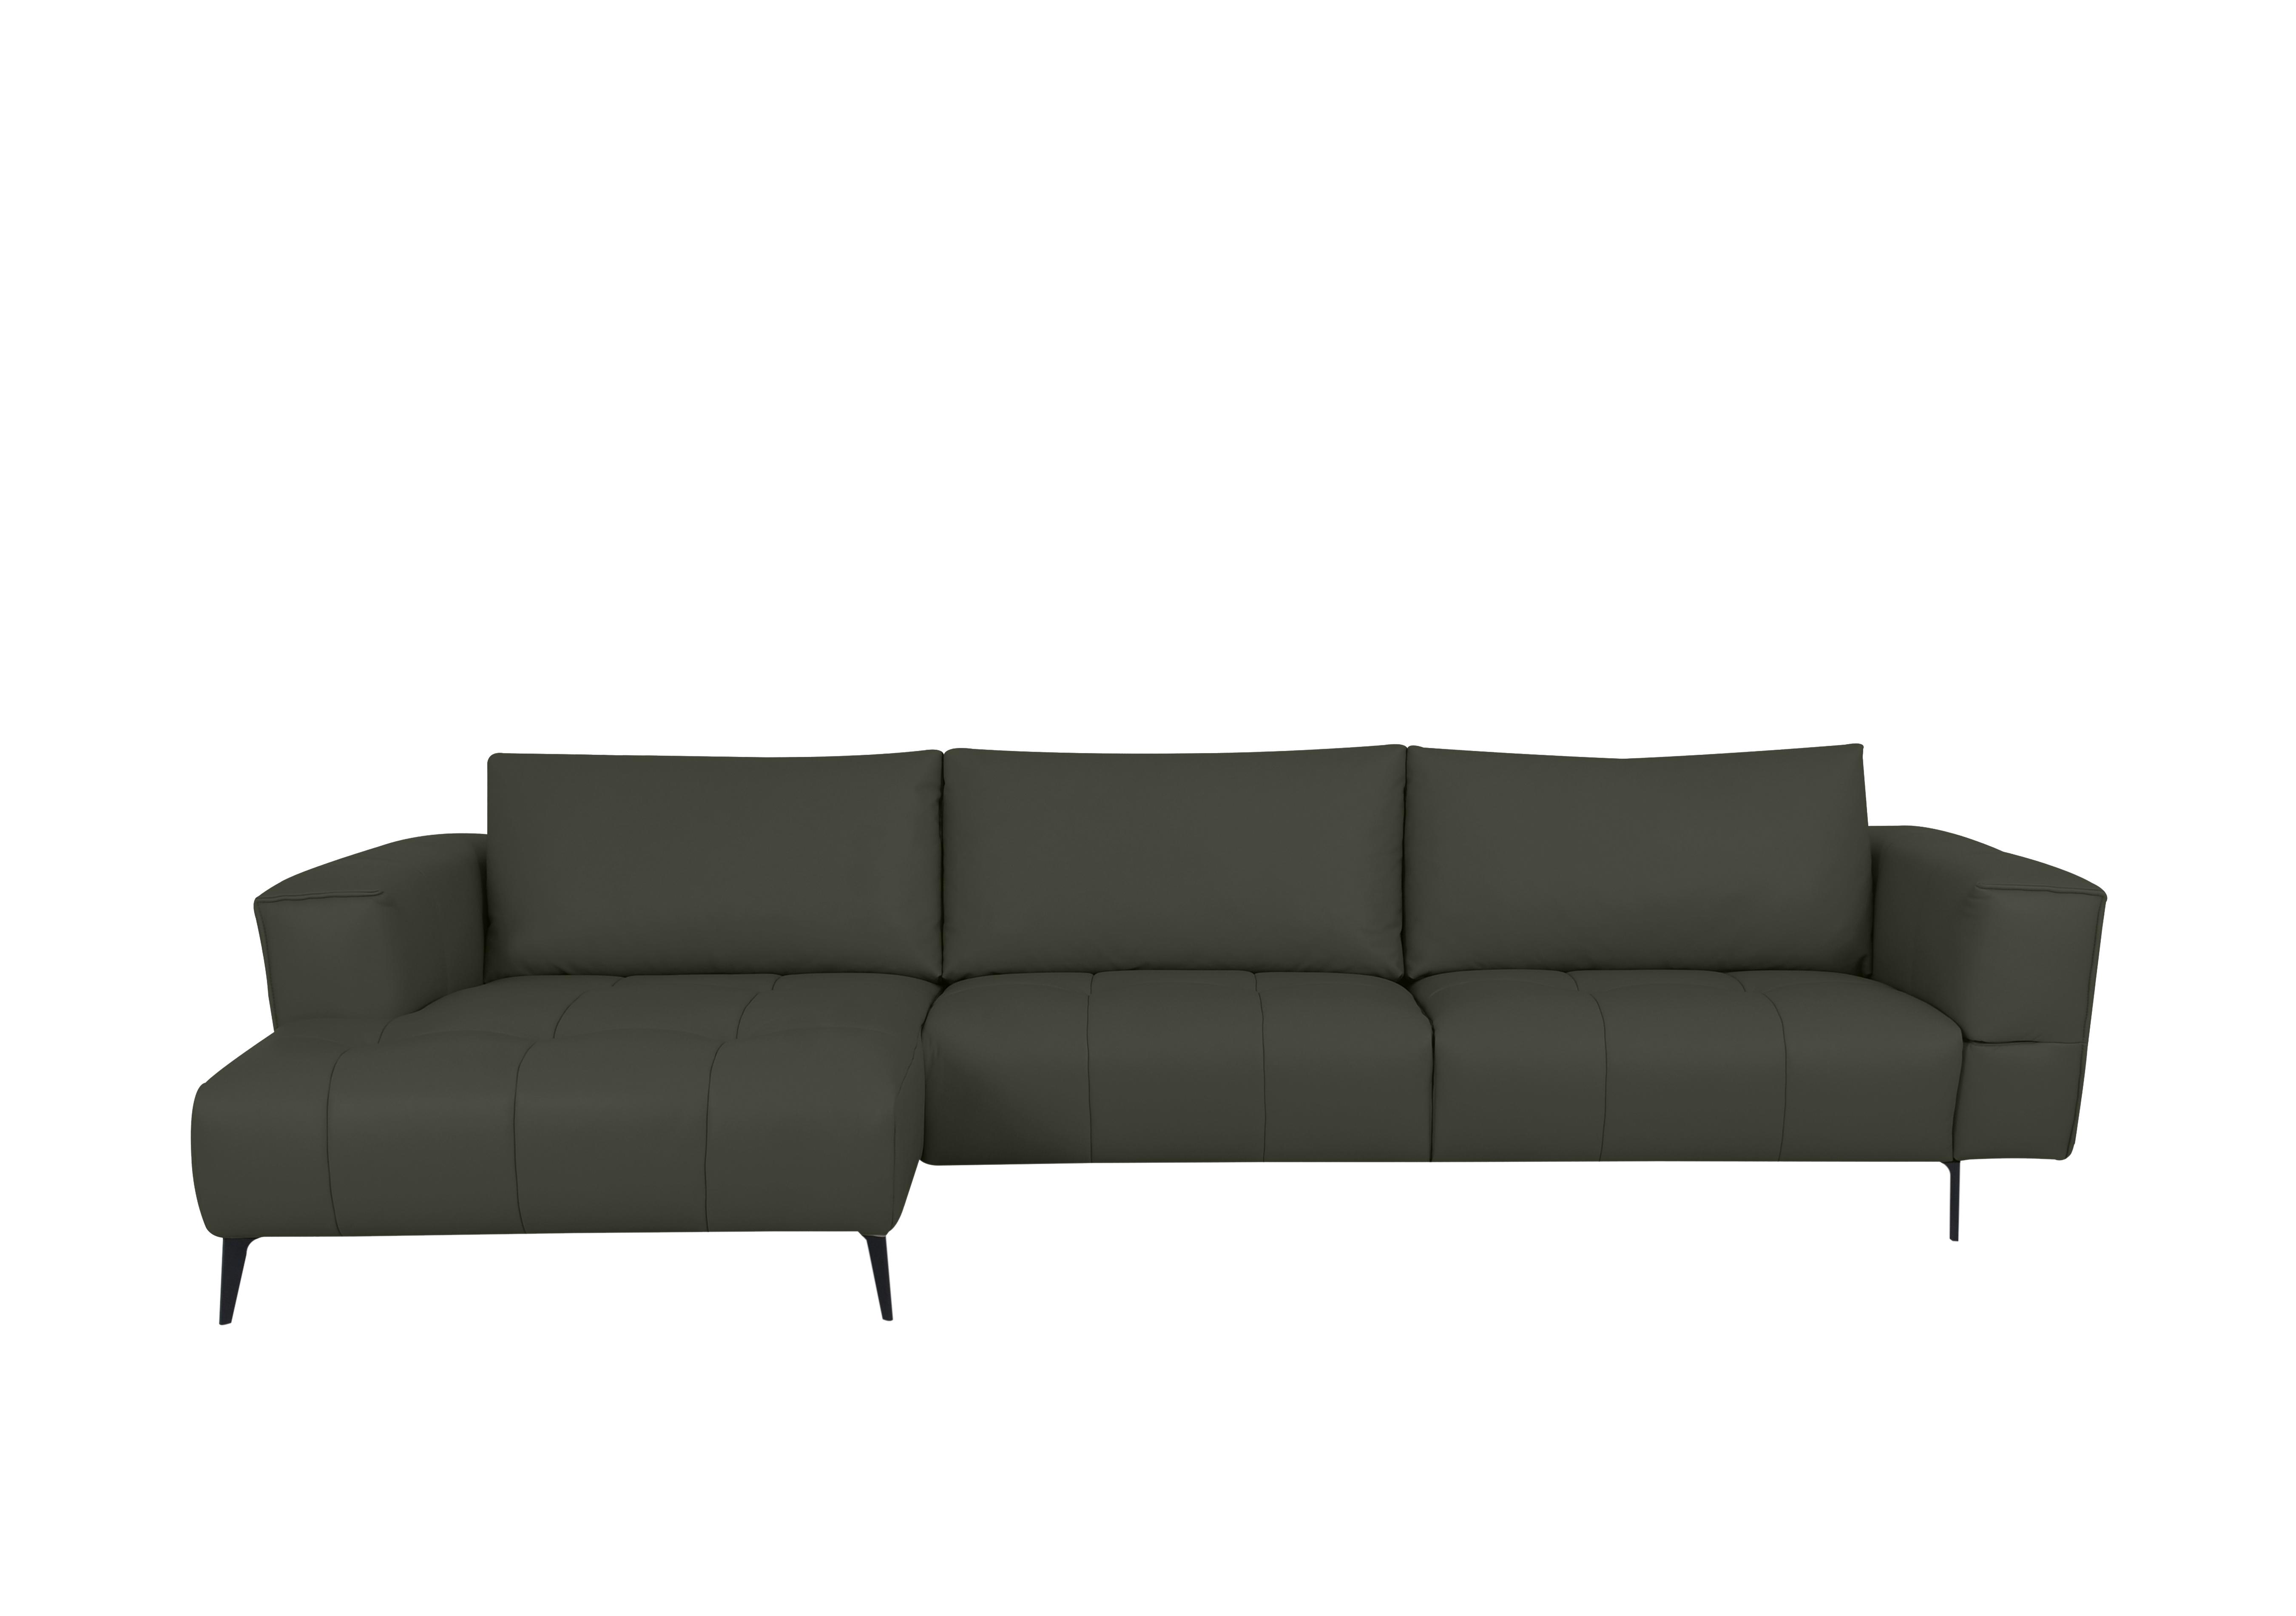 Lawson Leather Chaise End Sofa in Np-548e Dark Olive on Furniture Village